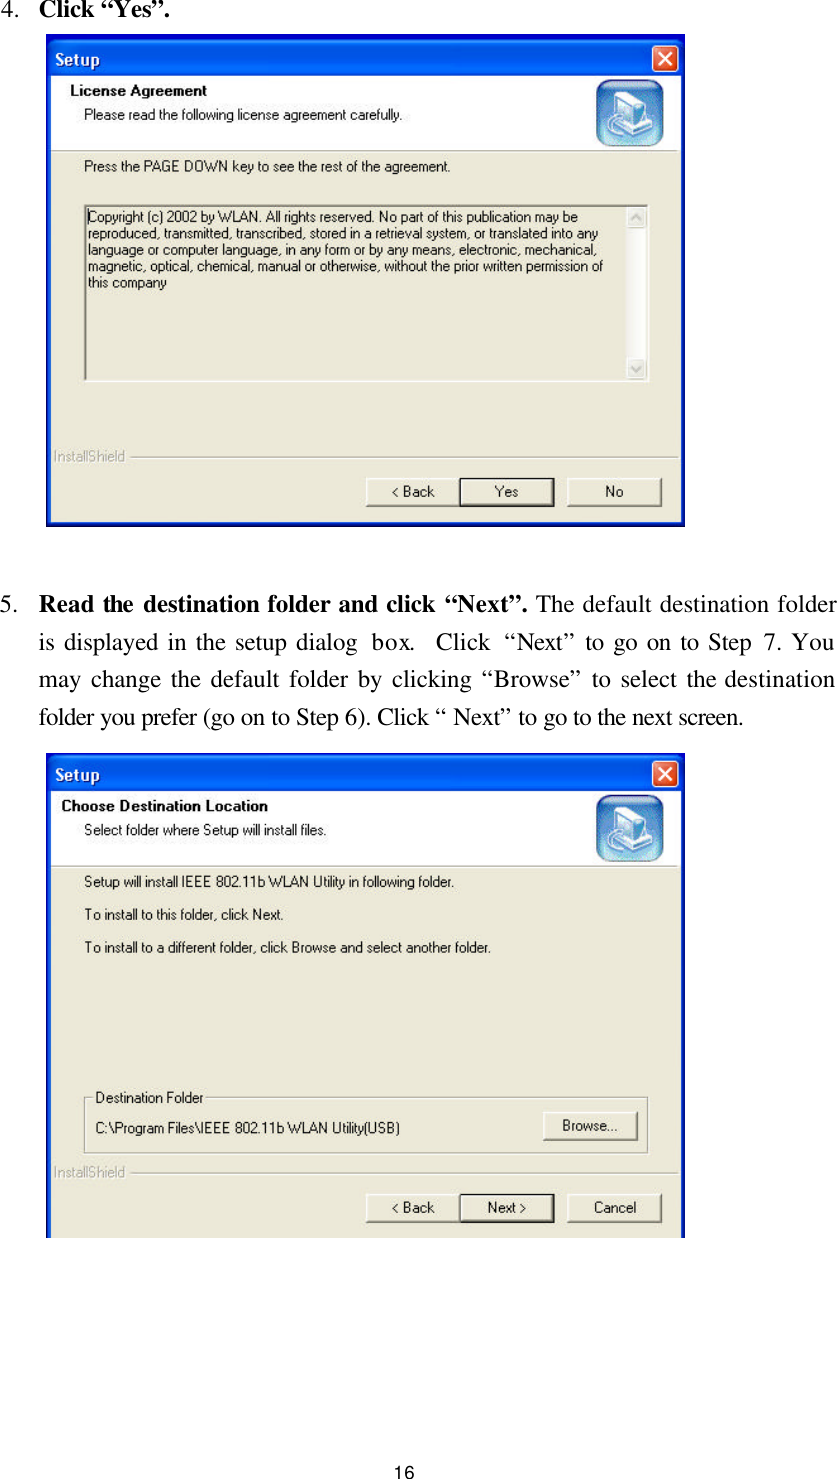  16 4.  Click “Yes”.                5.  Read the destination folder and click “Next”. The default destination folder is displayed in the setup dialog  box.  Click “Next” to go on to Step 7. You may change the default folder by clicking “Browse” to select the destination folder you prefer (go on to Step 6). Click “ Next” to go to the next screen.                